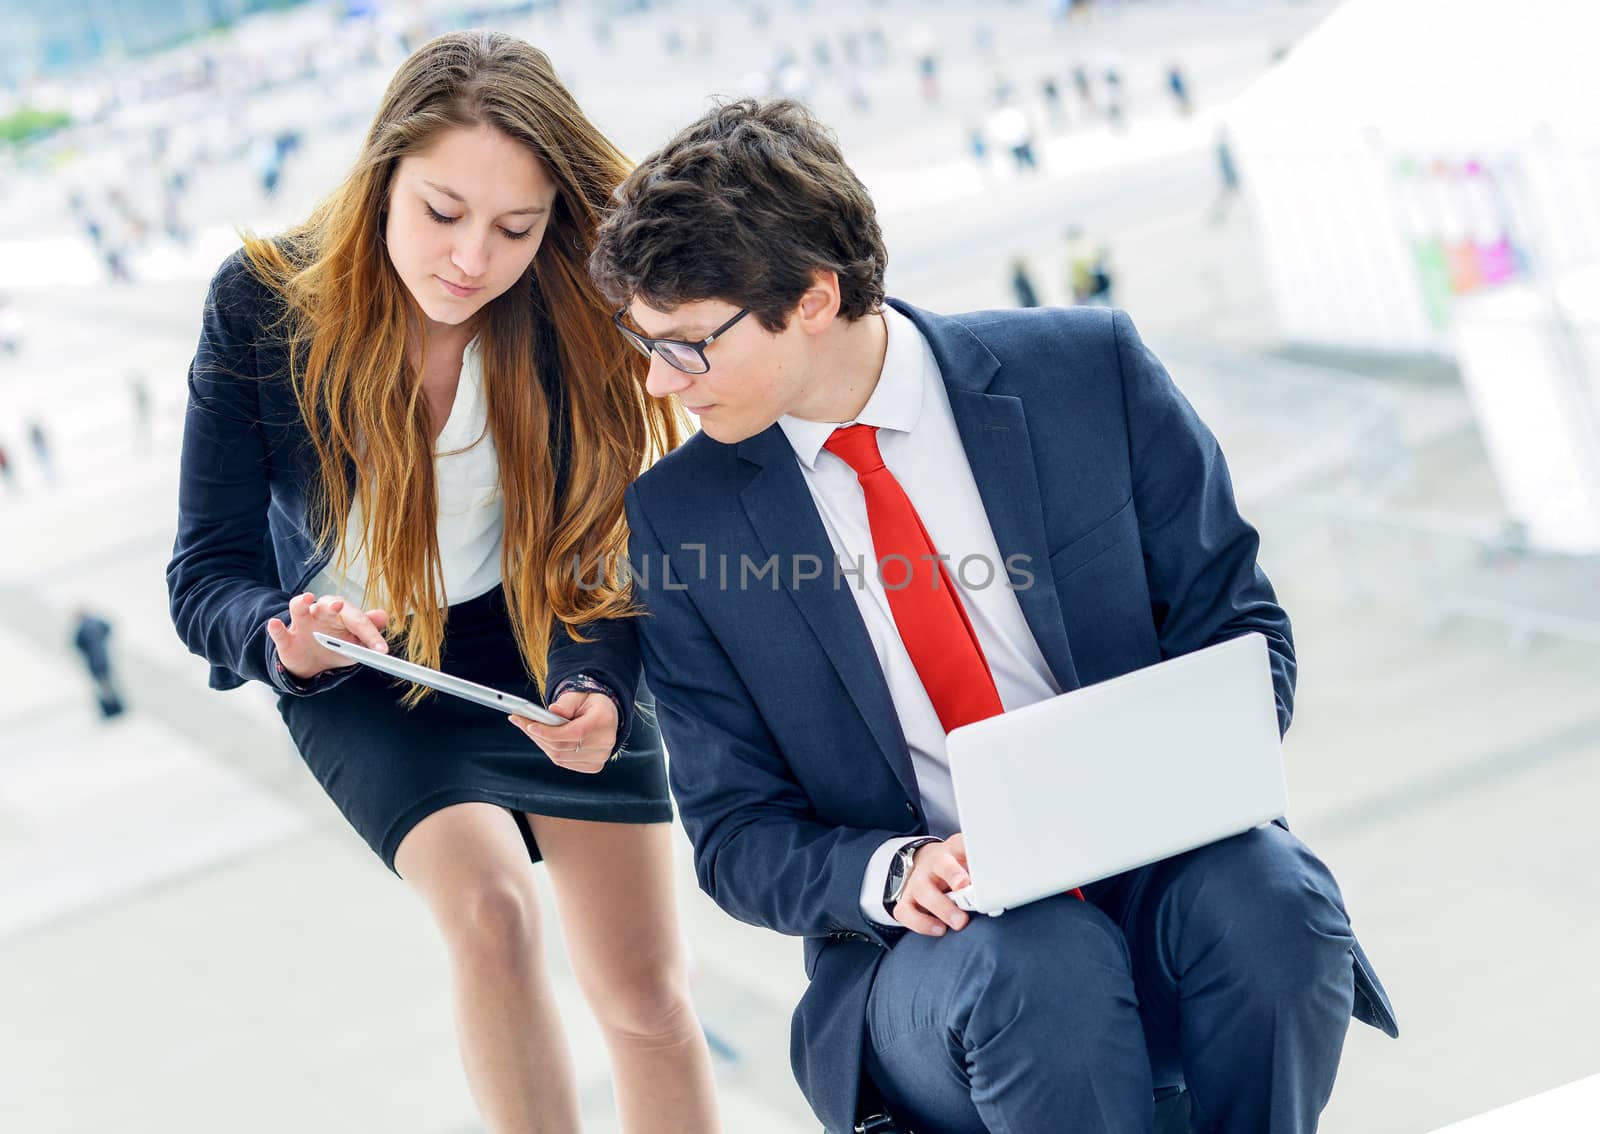 Junior executives dynamics working outside of their office by pixinoo